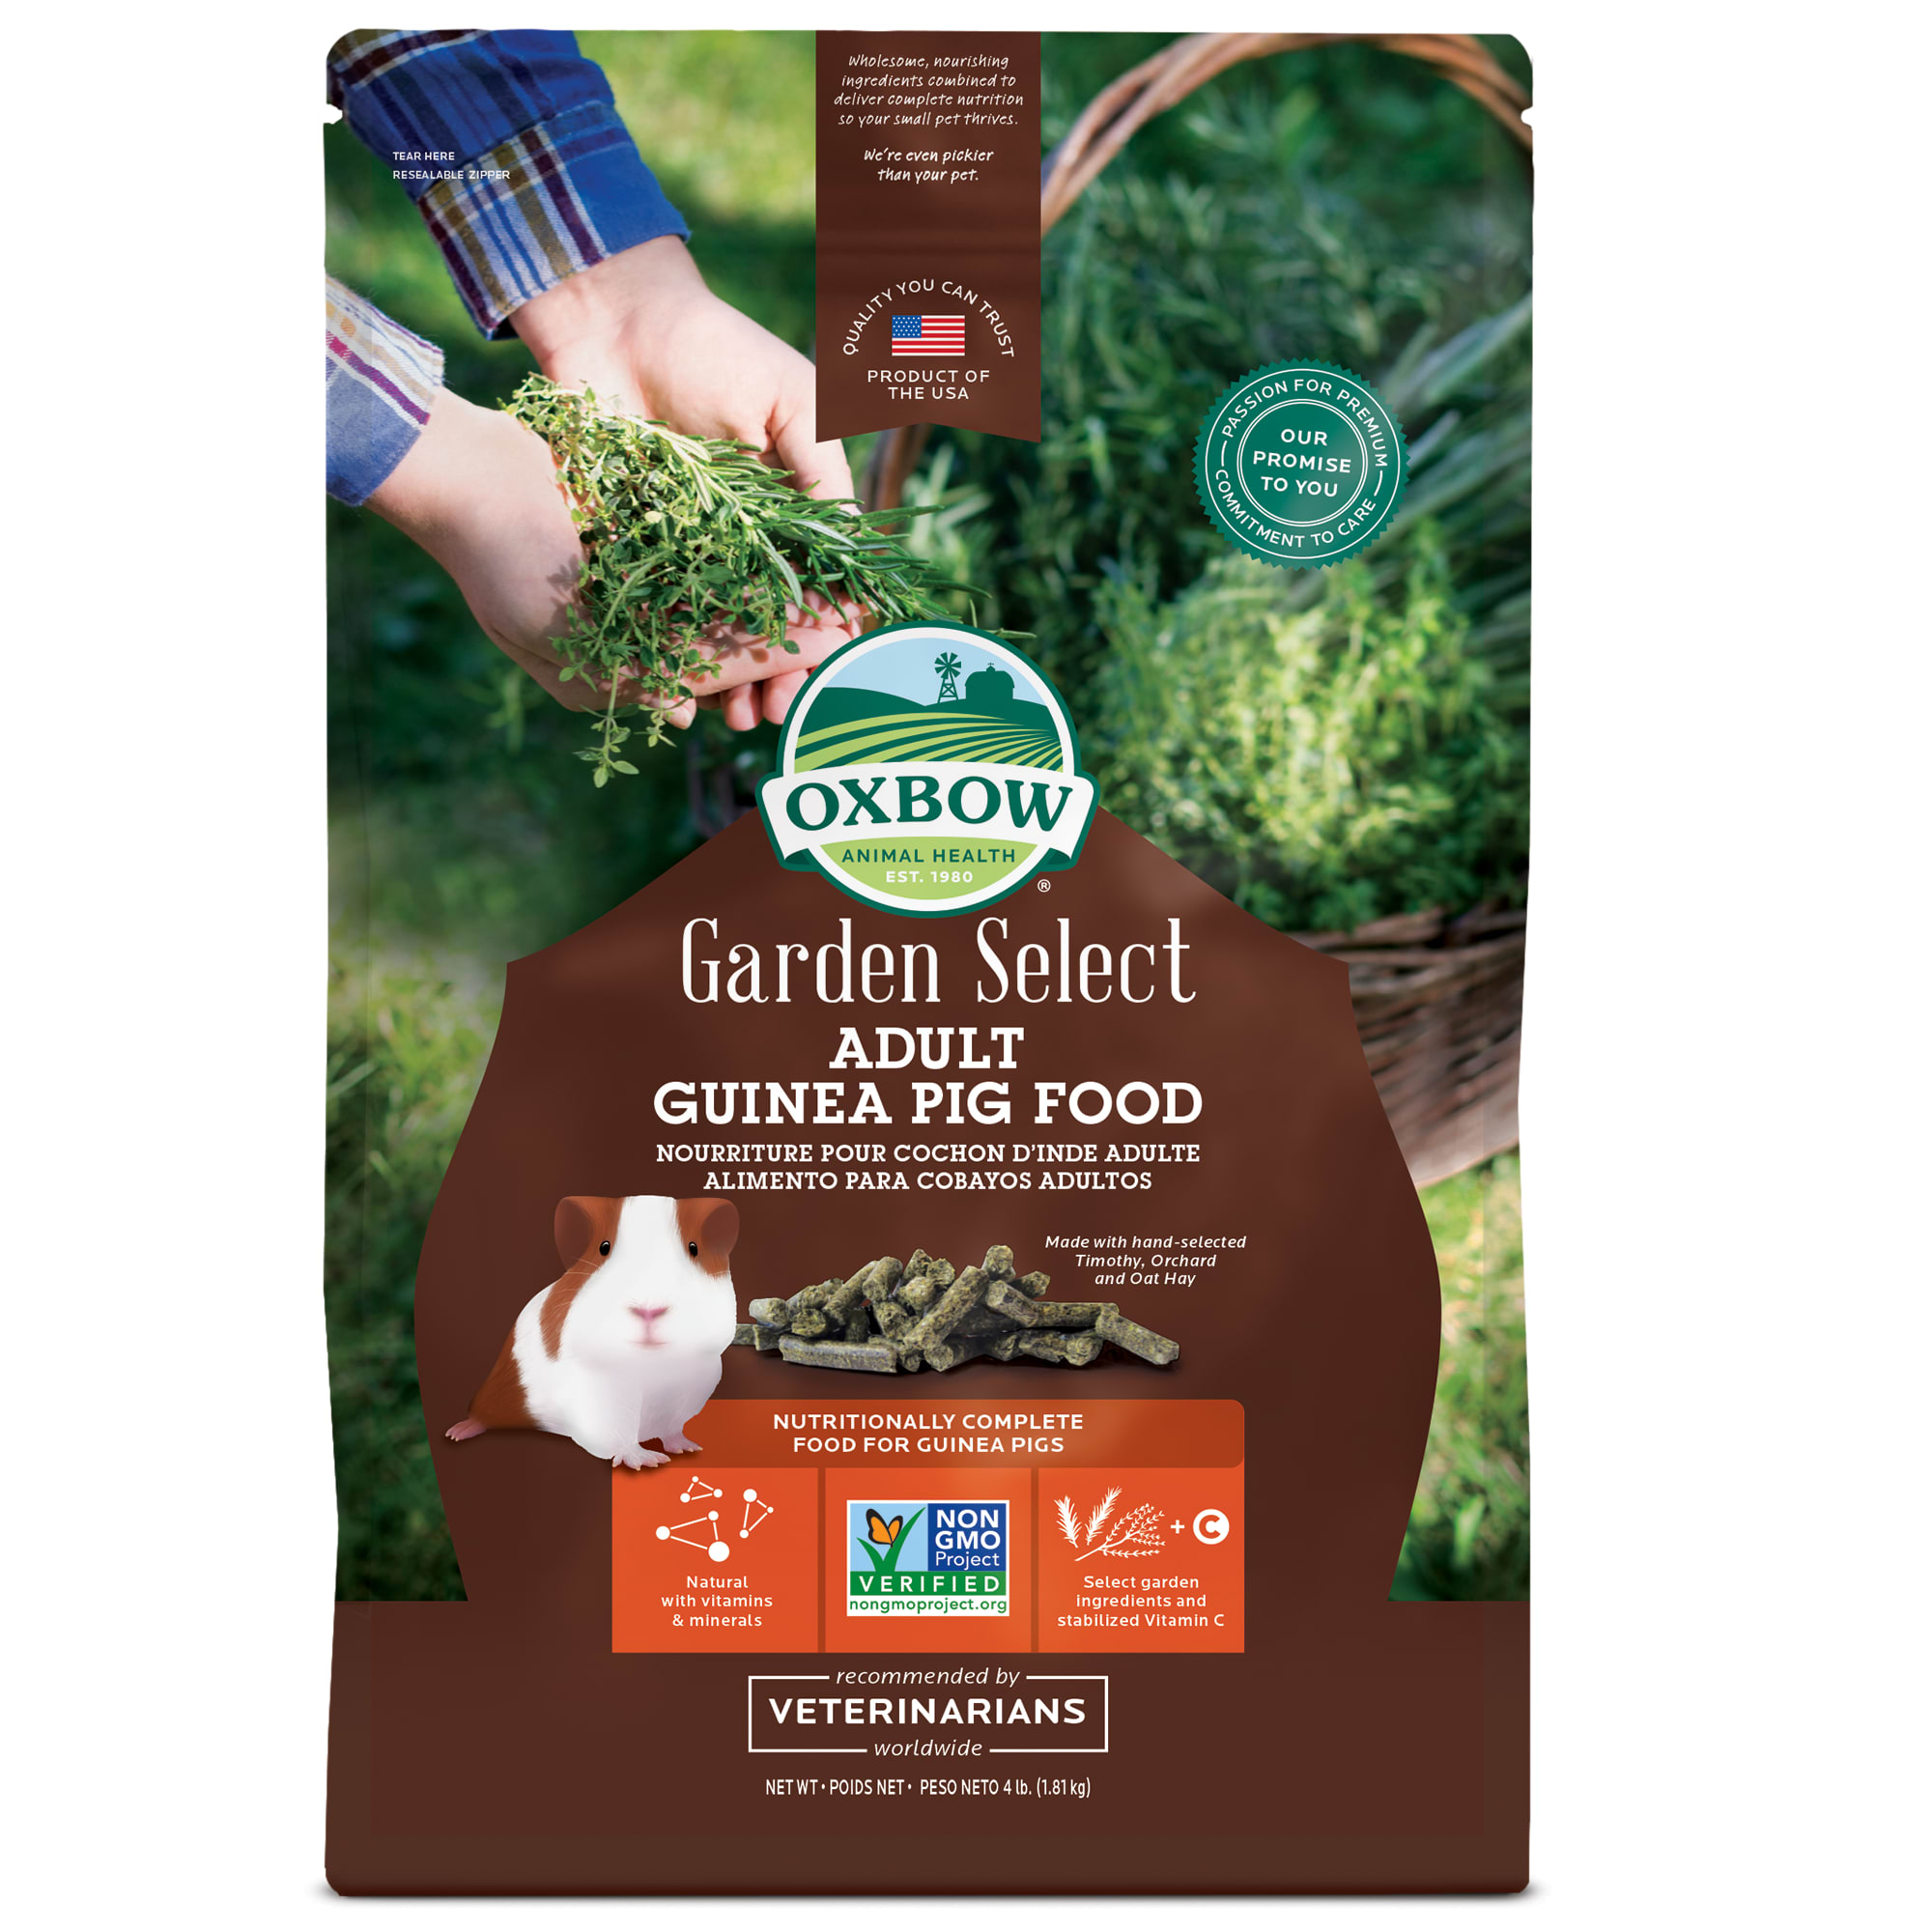 Oxbow Garden Select Fortified Food for 